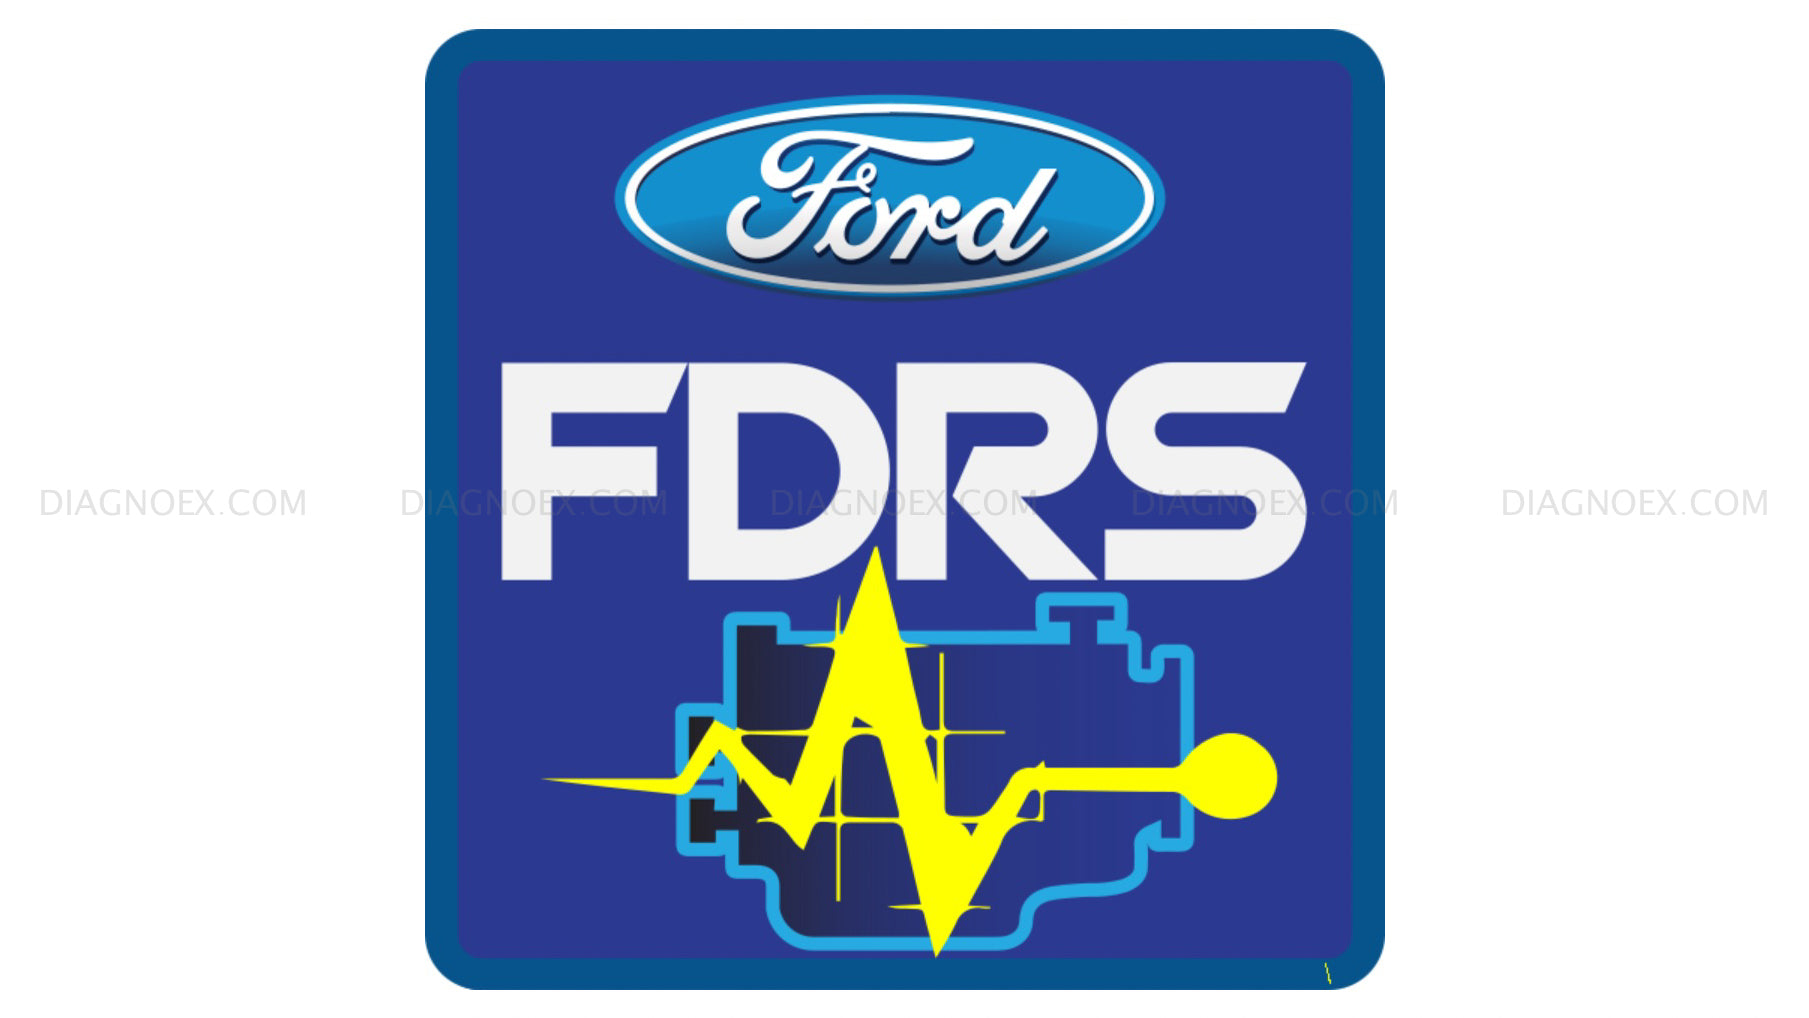 ford ids software license purchase